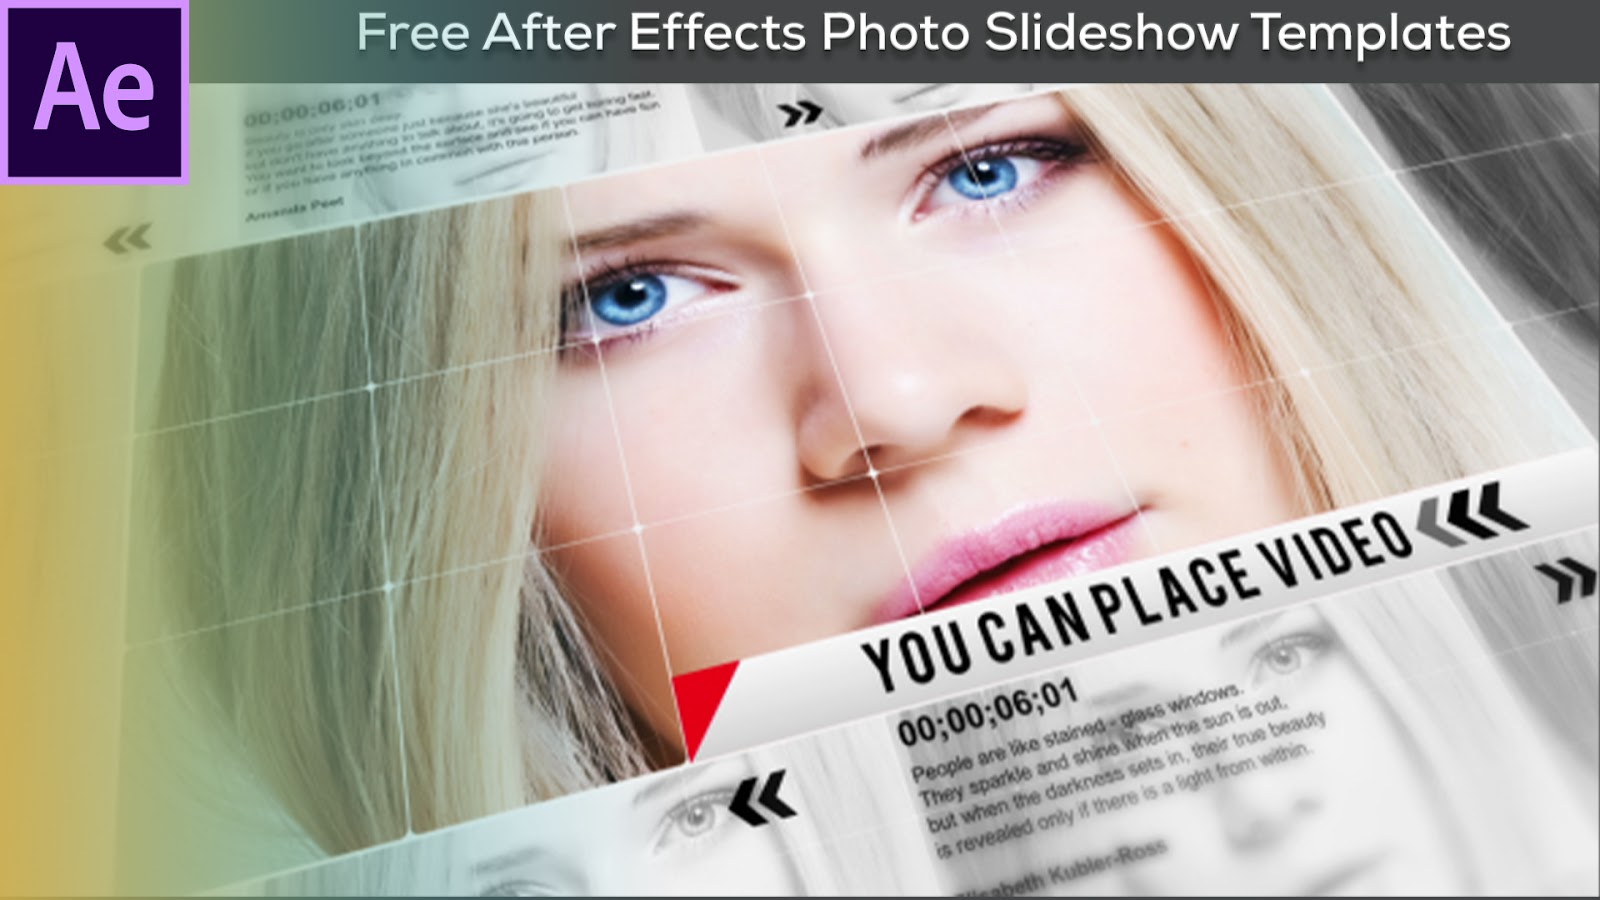 Free After Effects Photo Slideshow Templates After Effects Template Free Download PhotoshopDream